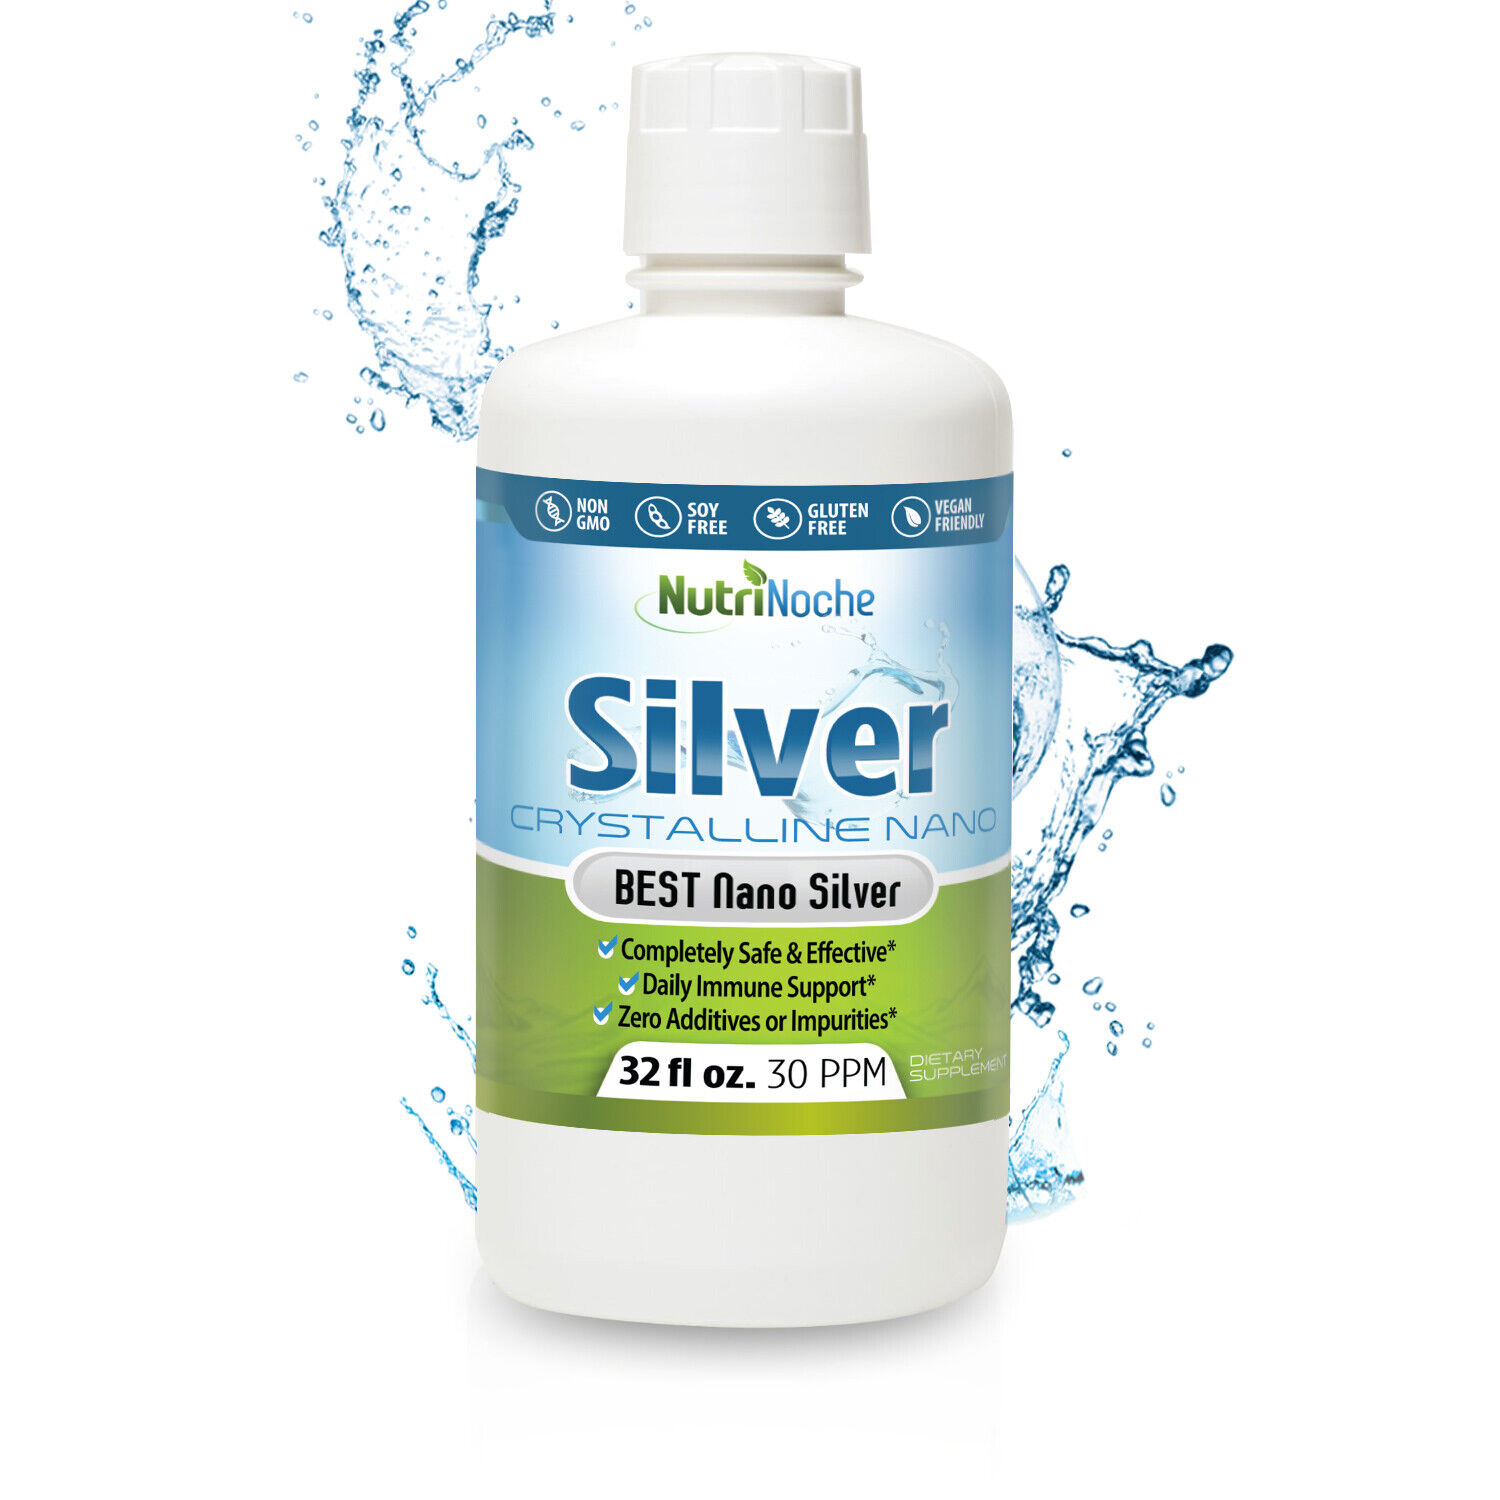 NutriNoche Colloidal Silver Mineral Supplement - The BEST Silver - 30 PPM 32 oz